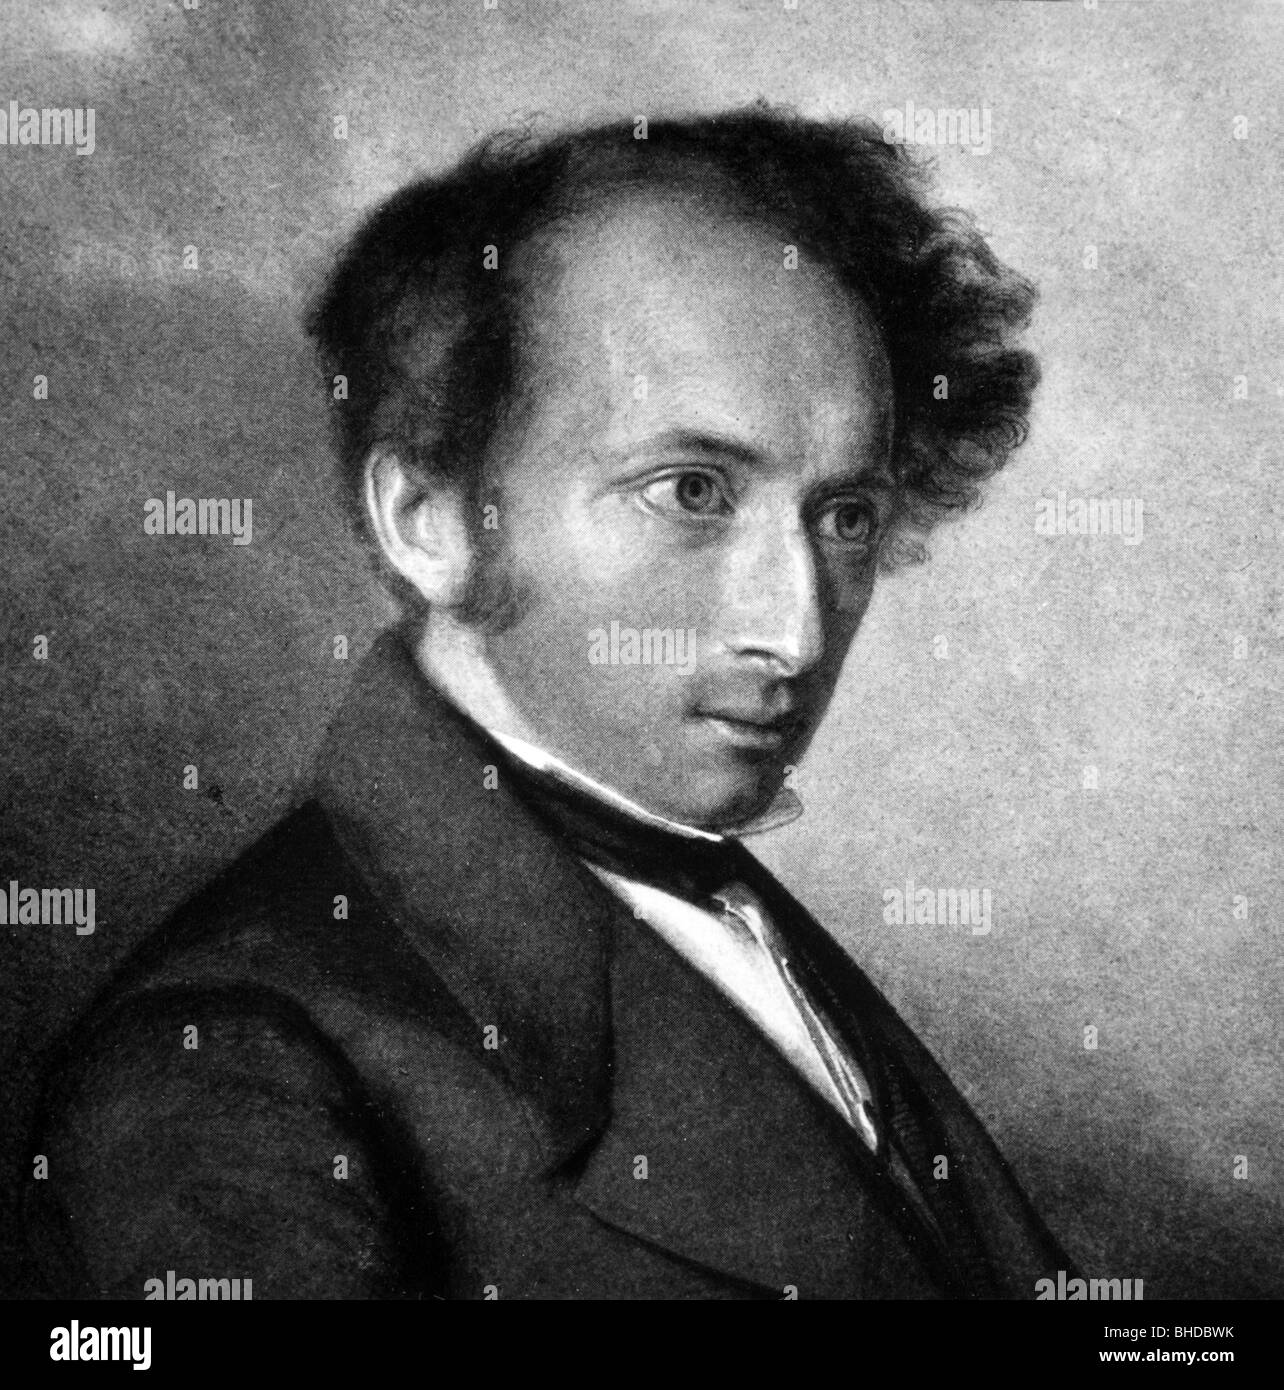 Jacoby, Johann, 1.5.1805 - 6.3.1877, Prussian politician and physician, portrait, drawing by Ferdinand Bender, Stock Photo